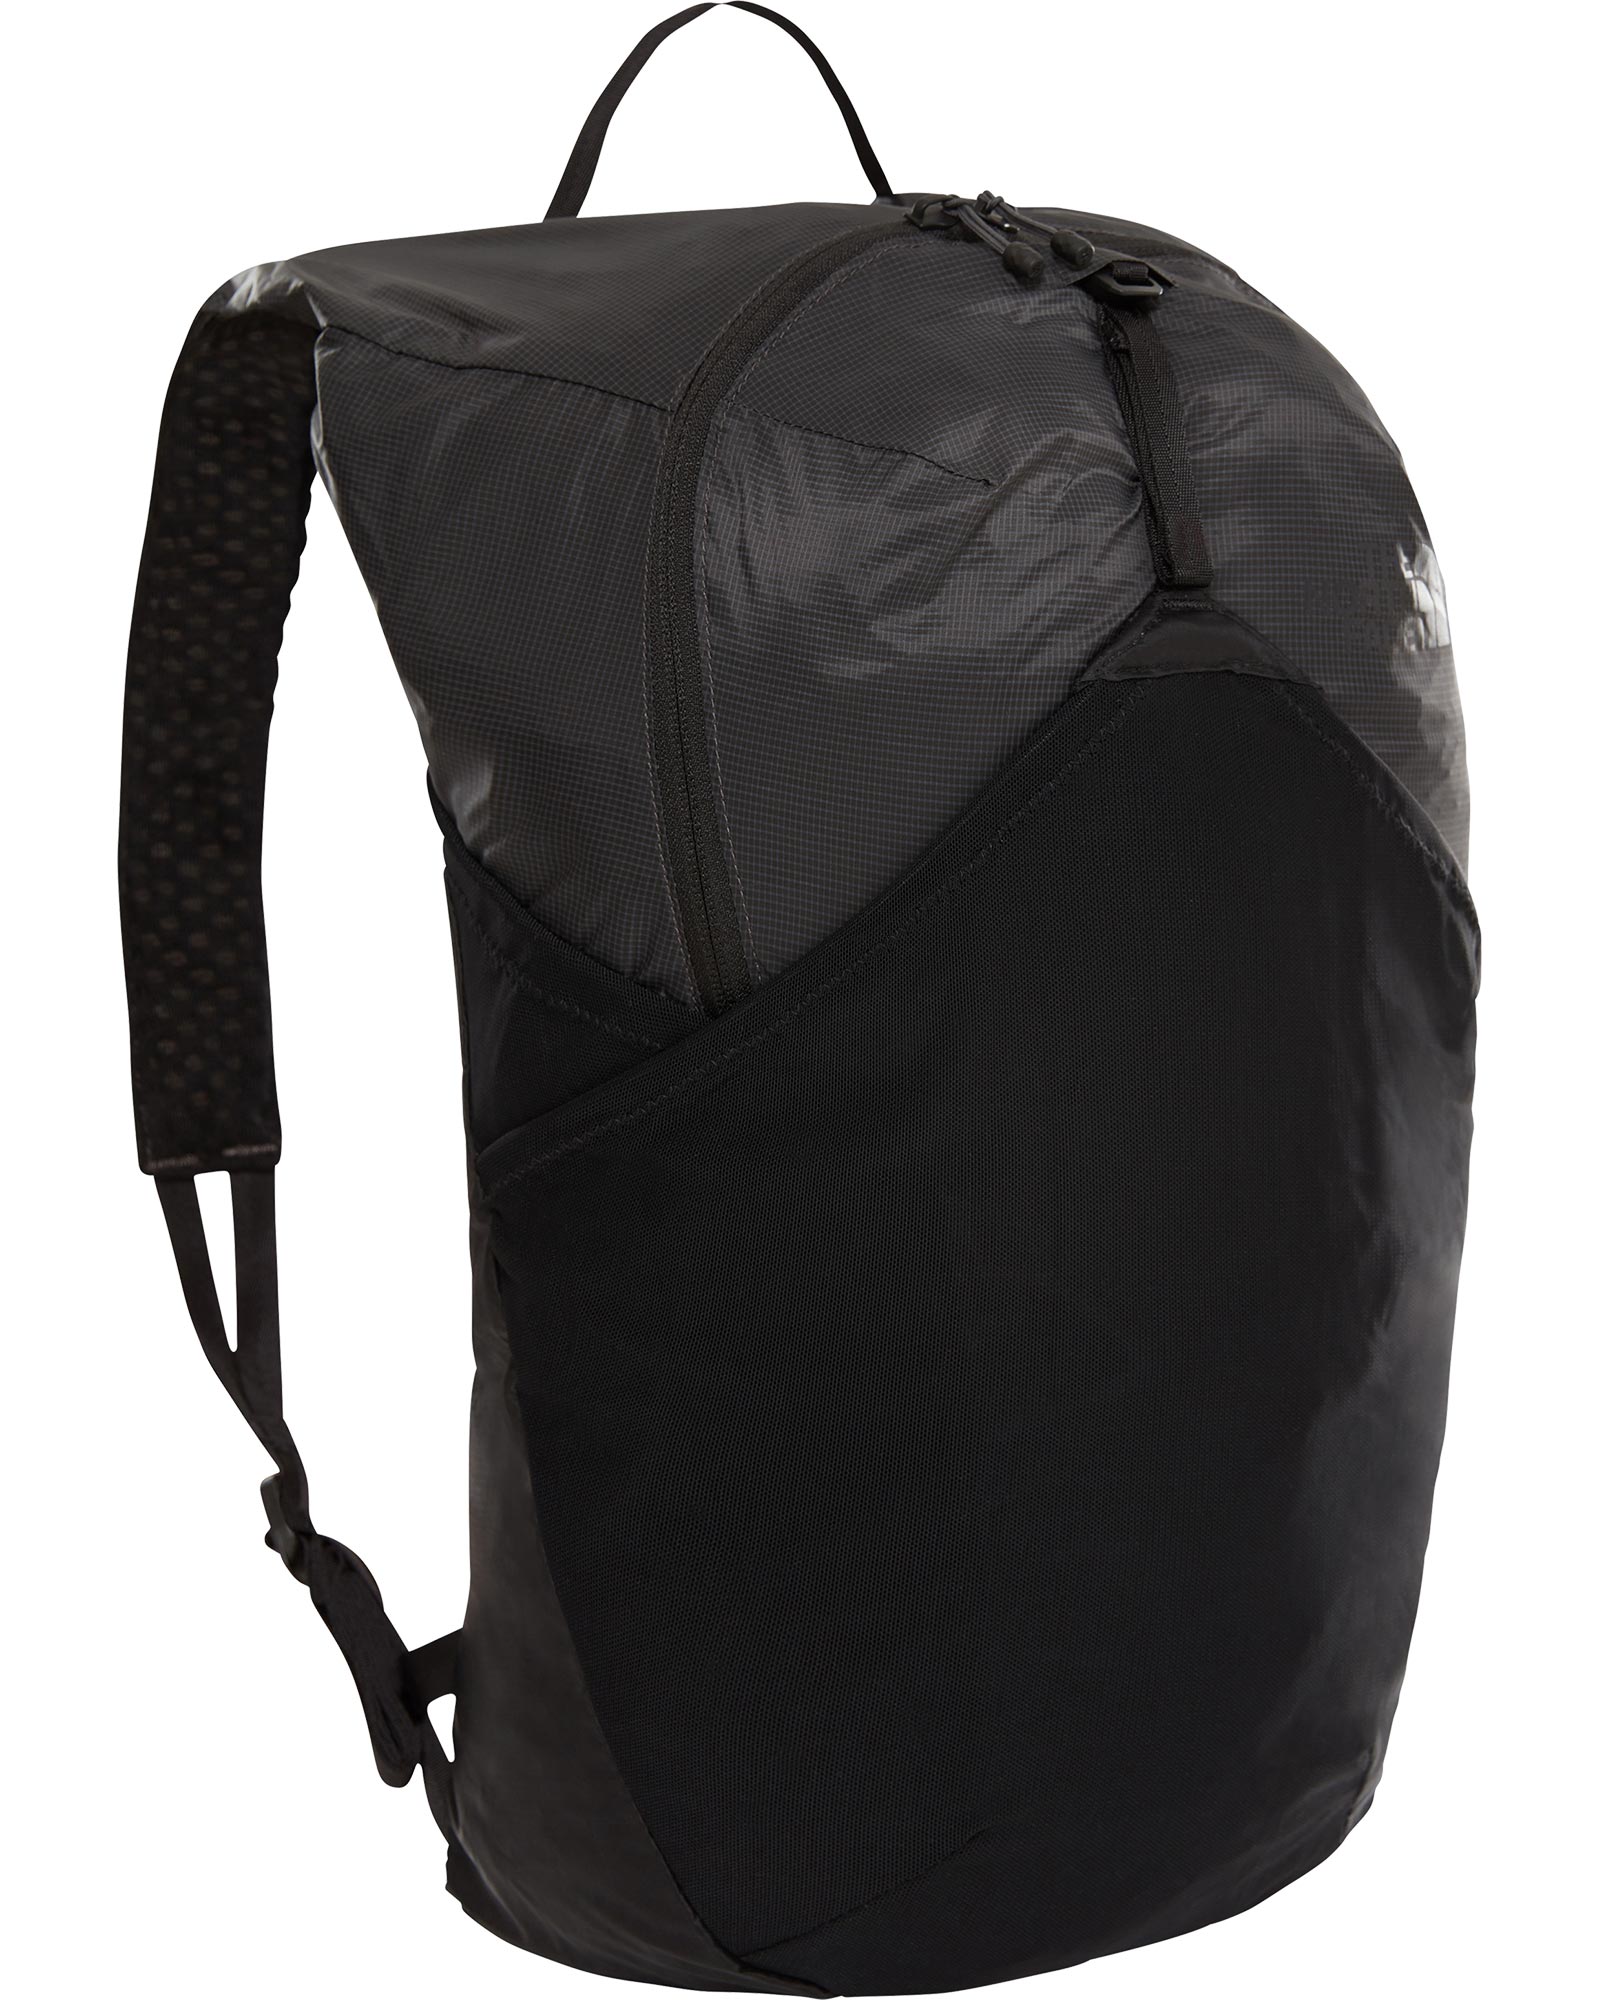 Product image of The North Face Flyweight Backpack